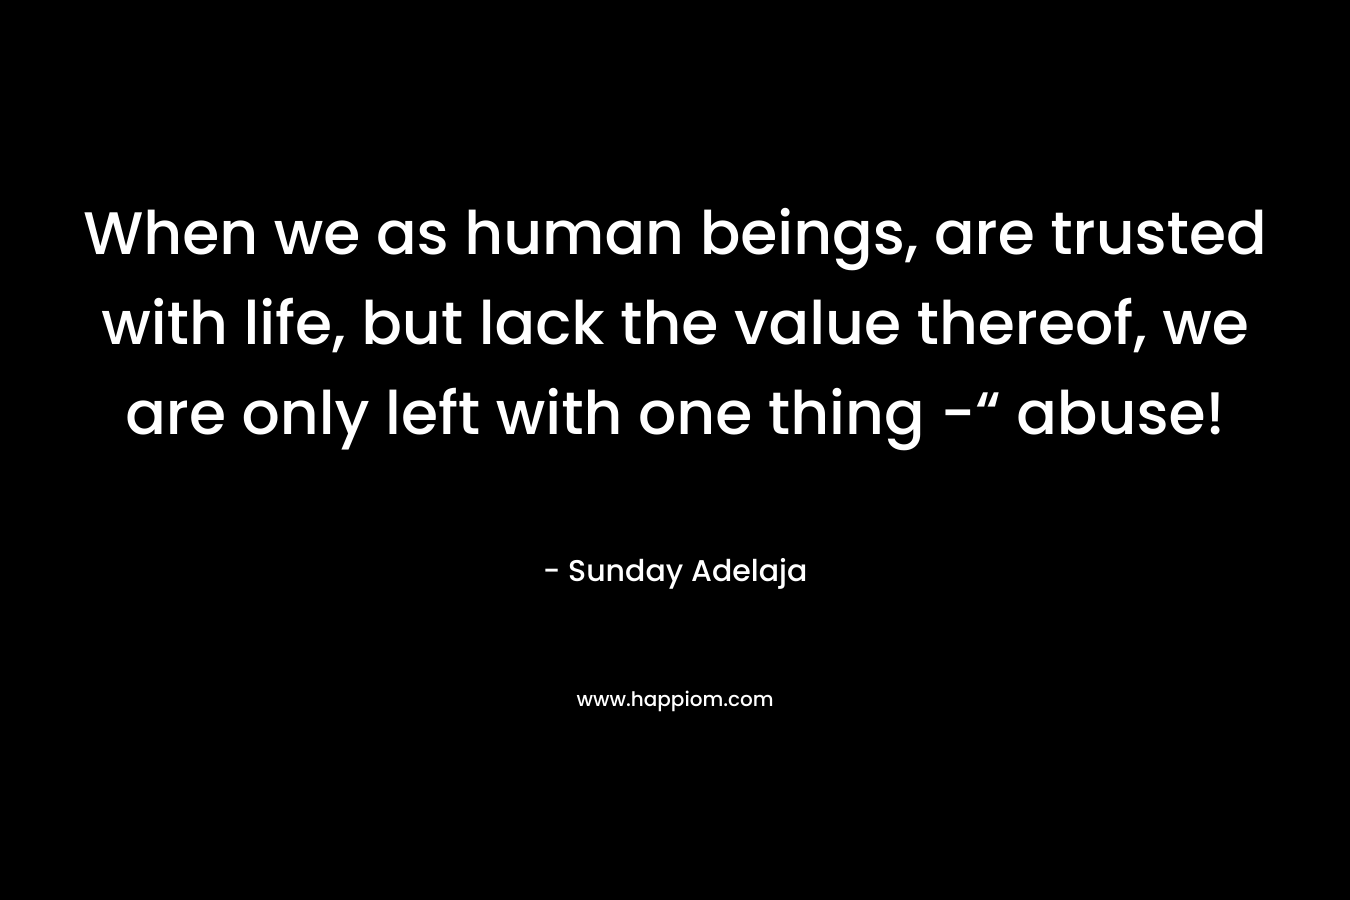 When we as human beings, are trusted with life, but lack the value thereof, we are only left with one thing -“ abuse!